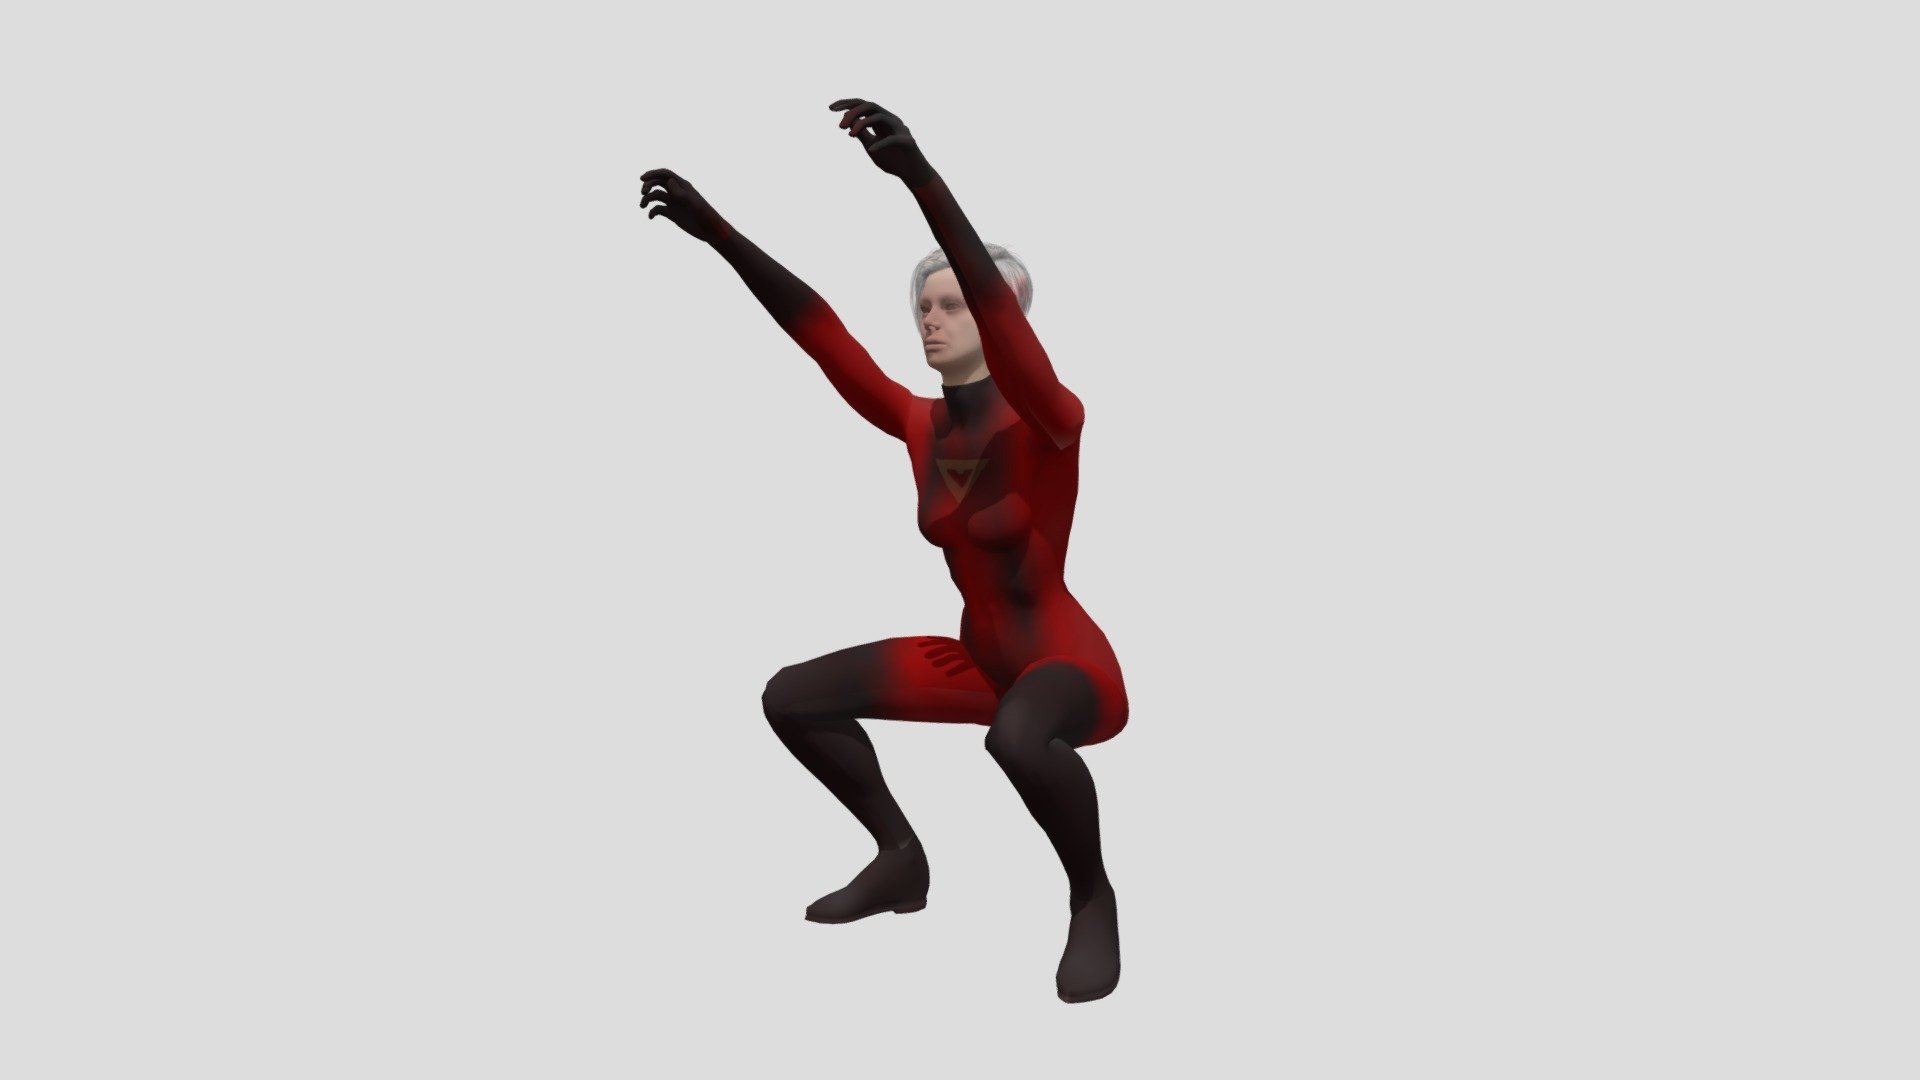 Animated female fitness instructor character excersizes by doing air squats in this looping animation at 30 frames per second.

View this 3D model in this free augmented reality Fitness Trainer app for Android on Google Play:

https://play.google.com/store/apps/details?id=com.arfitnesstrainer.app - Personal Trainer does the Air Squat Exercise - 3D model by LasquetiSpice 3d model